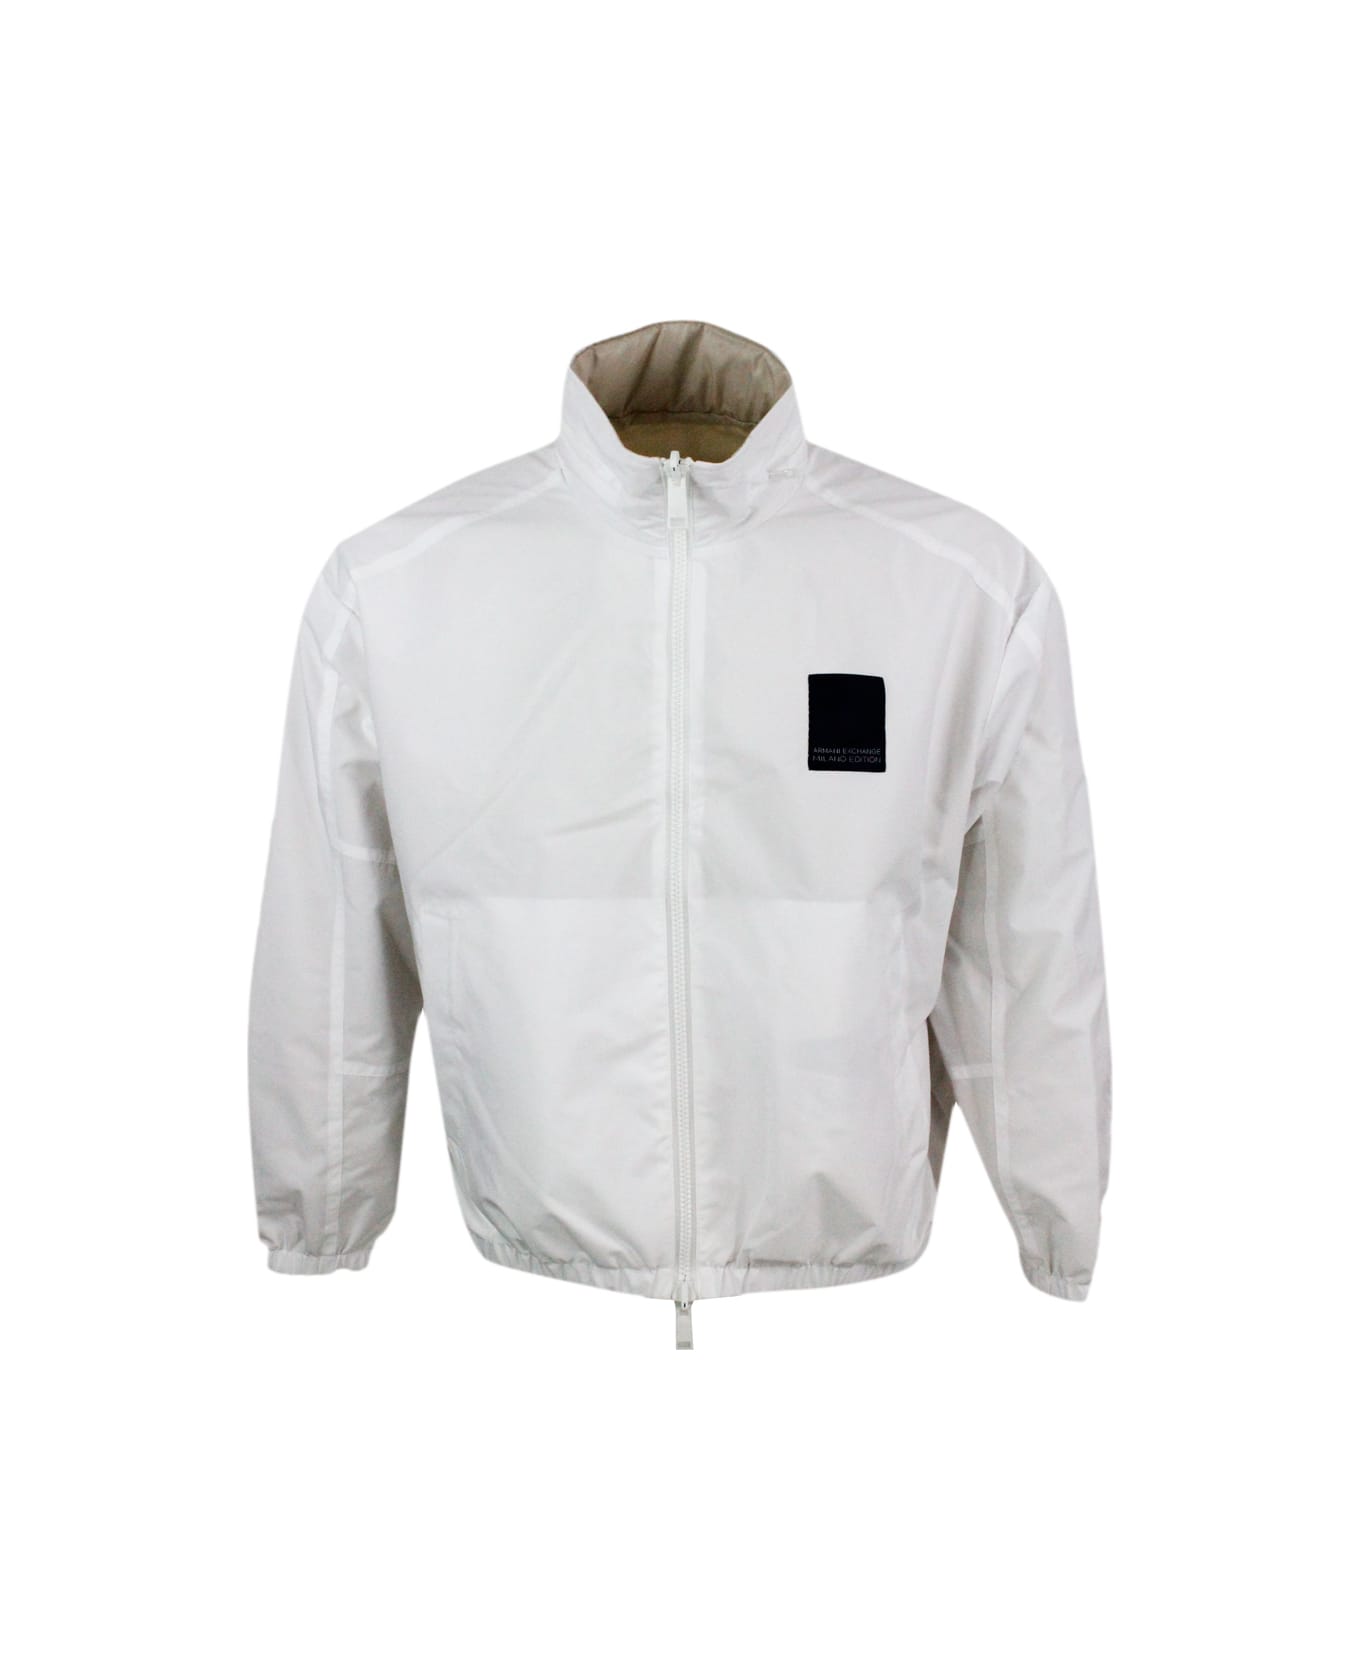 Armani Collezioni Reversible Windproof Jacket In Light Technical Fabric, Milano Edition Line, Zip Closure And Concealed Hood - White ジャケット